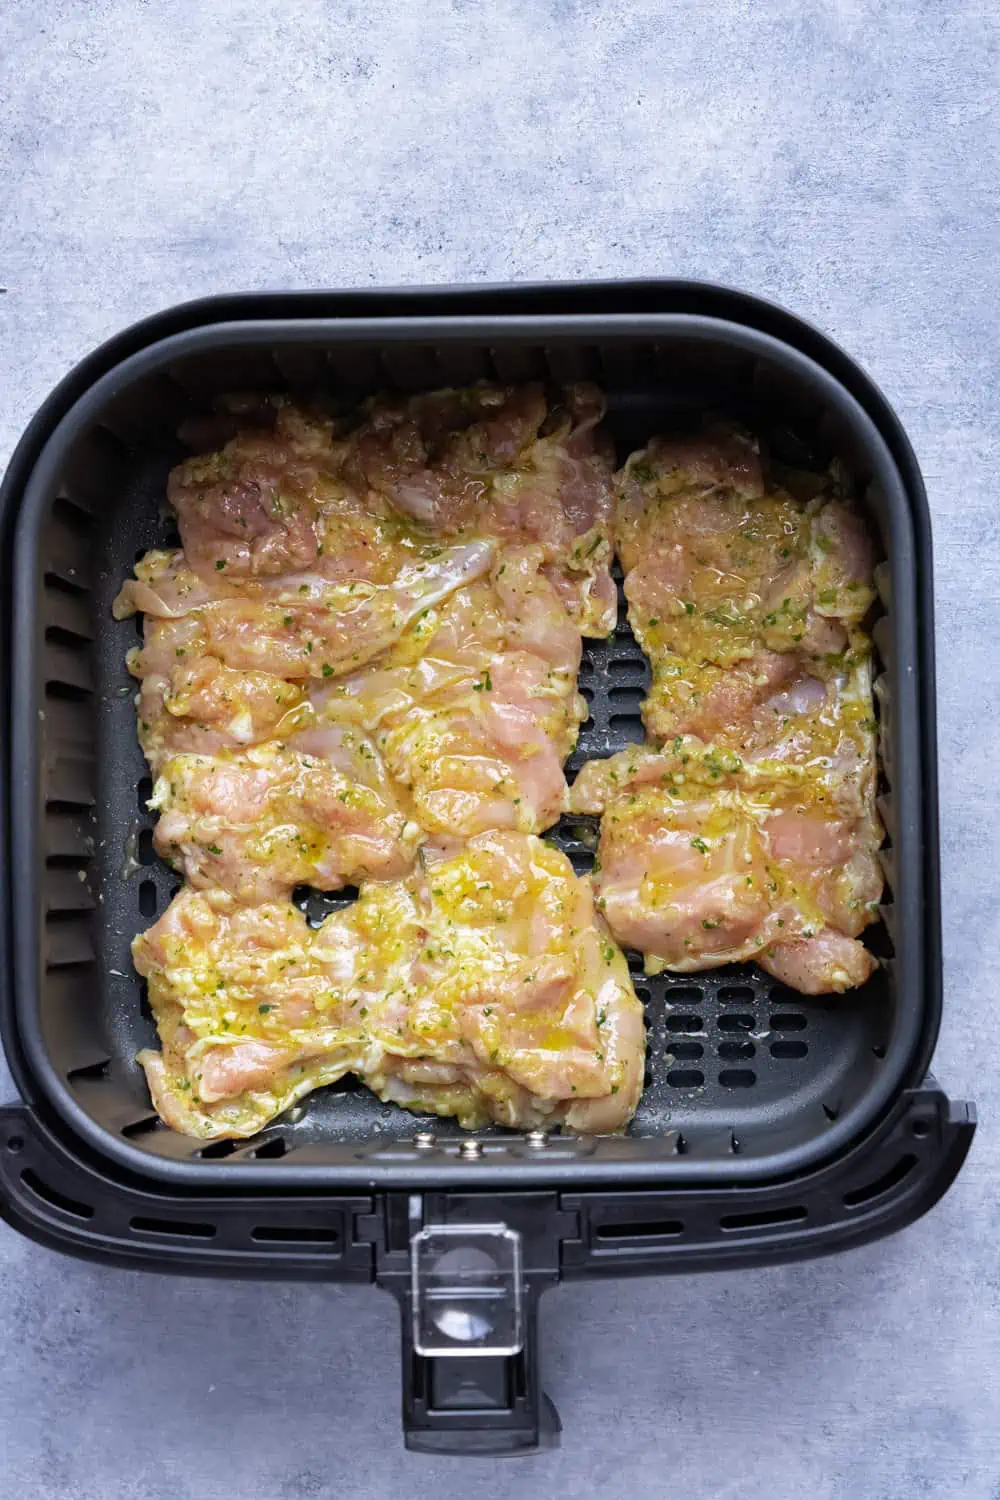 Marinated chicken thighs in the air fryer basket before cooking.